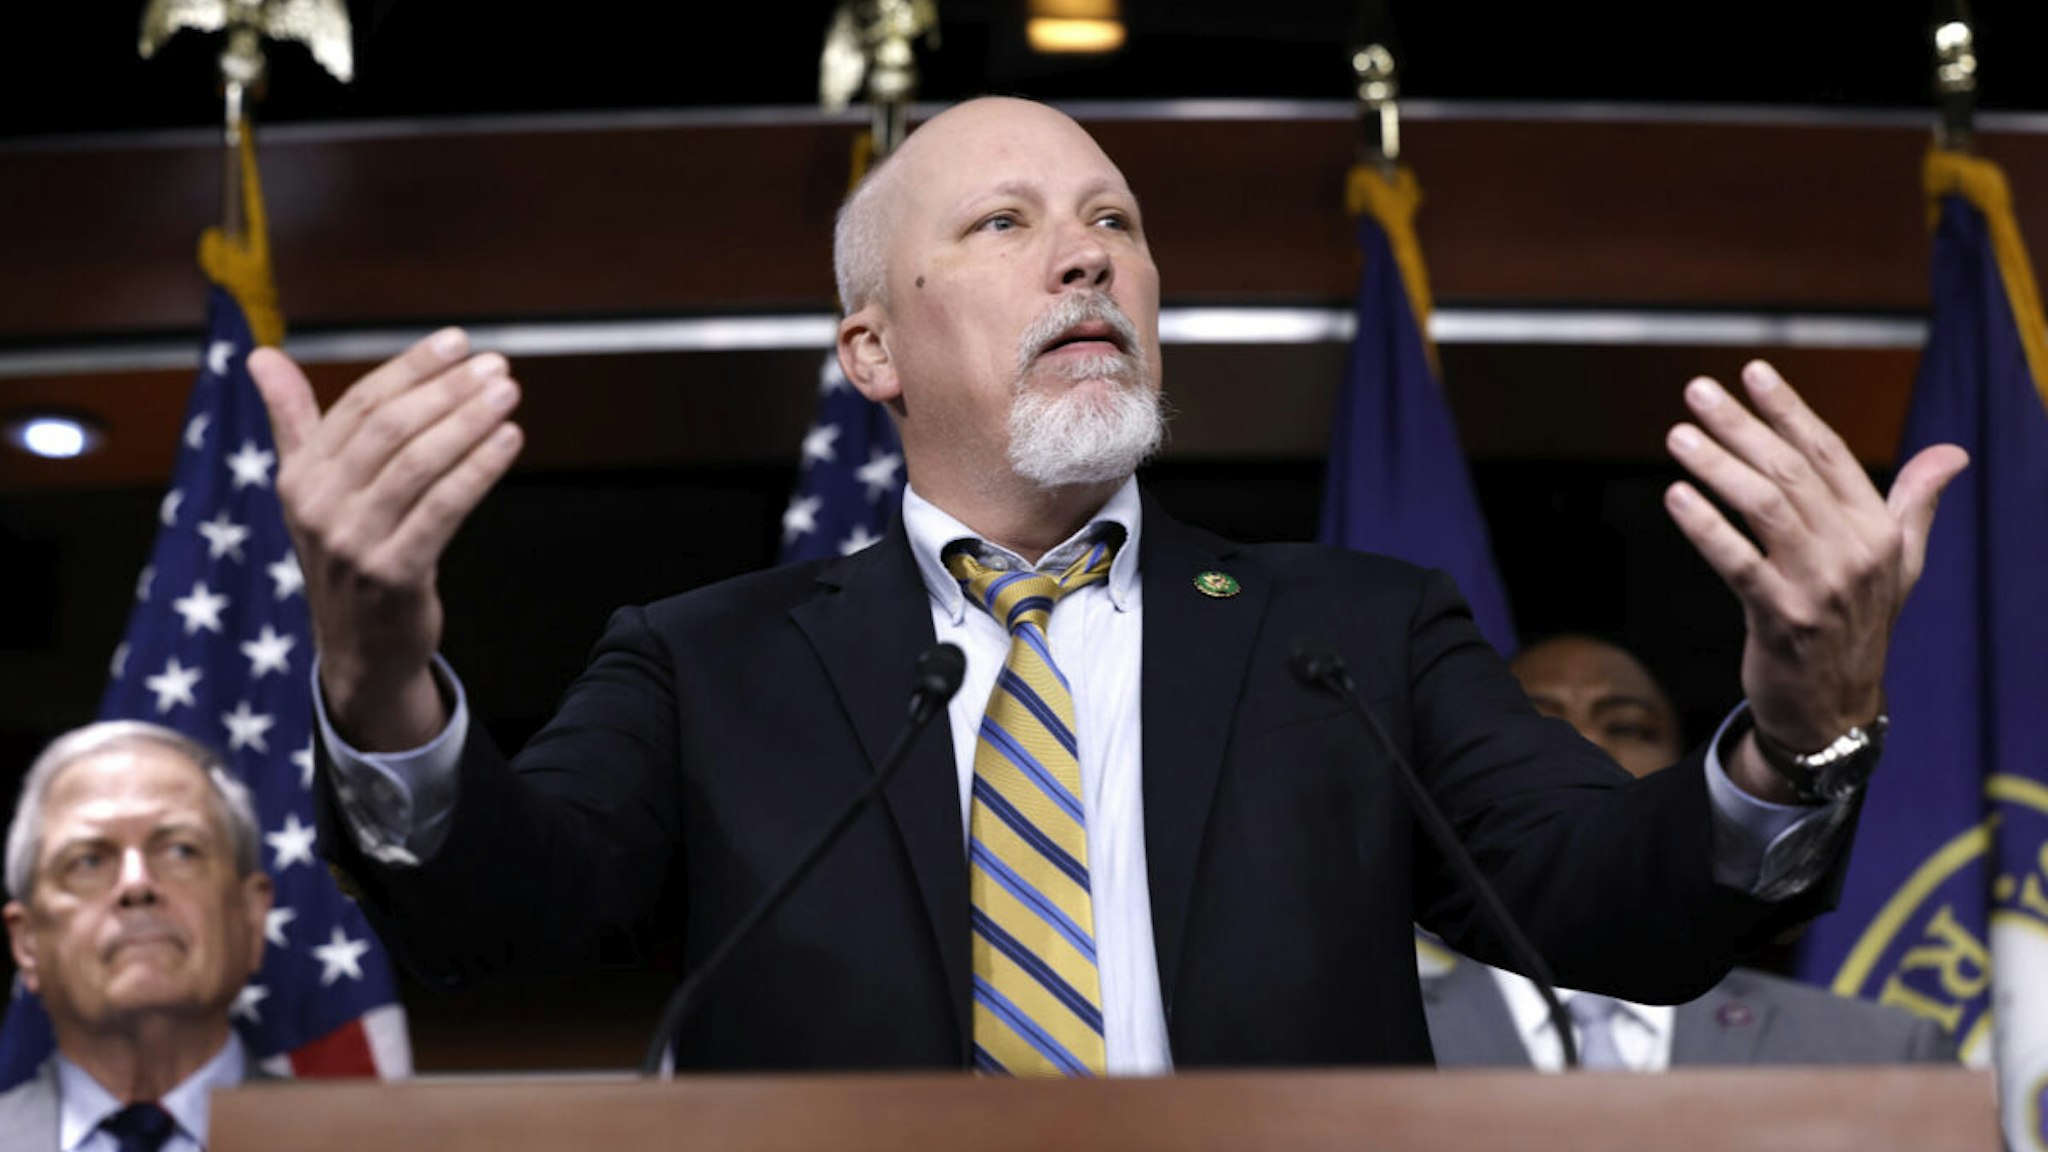 Rep. Chip Roy (R-TX) speaks during a news conference with the House Freedom Caucus on the debt limit negotiations at the U.S. Capitol Building on March 10, 2023 in Washington, DC.